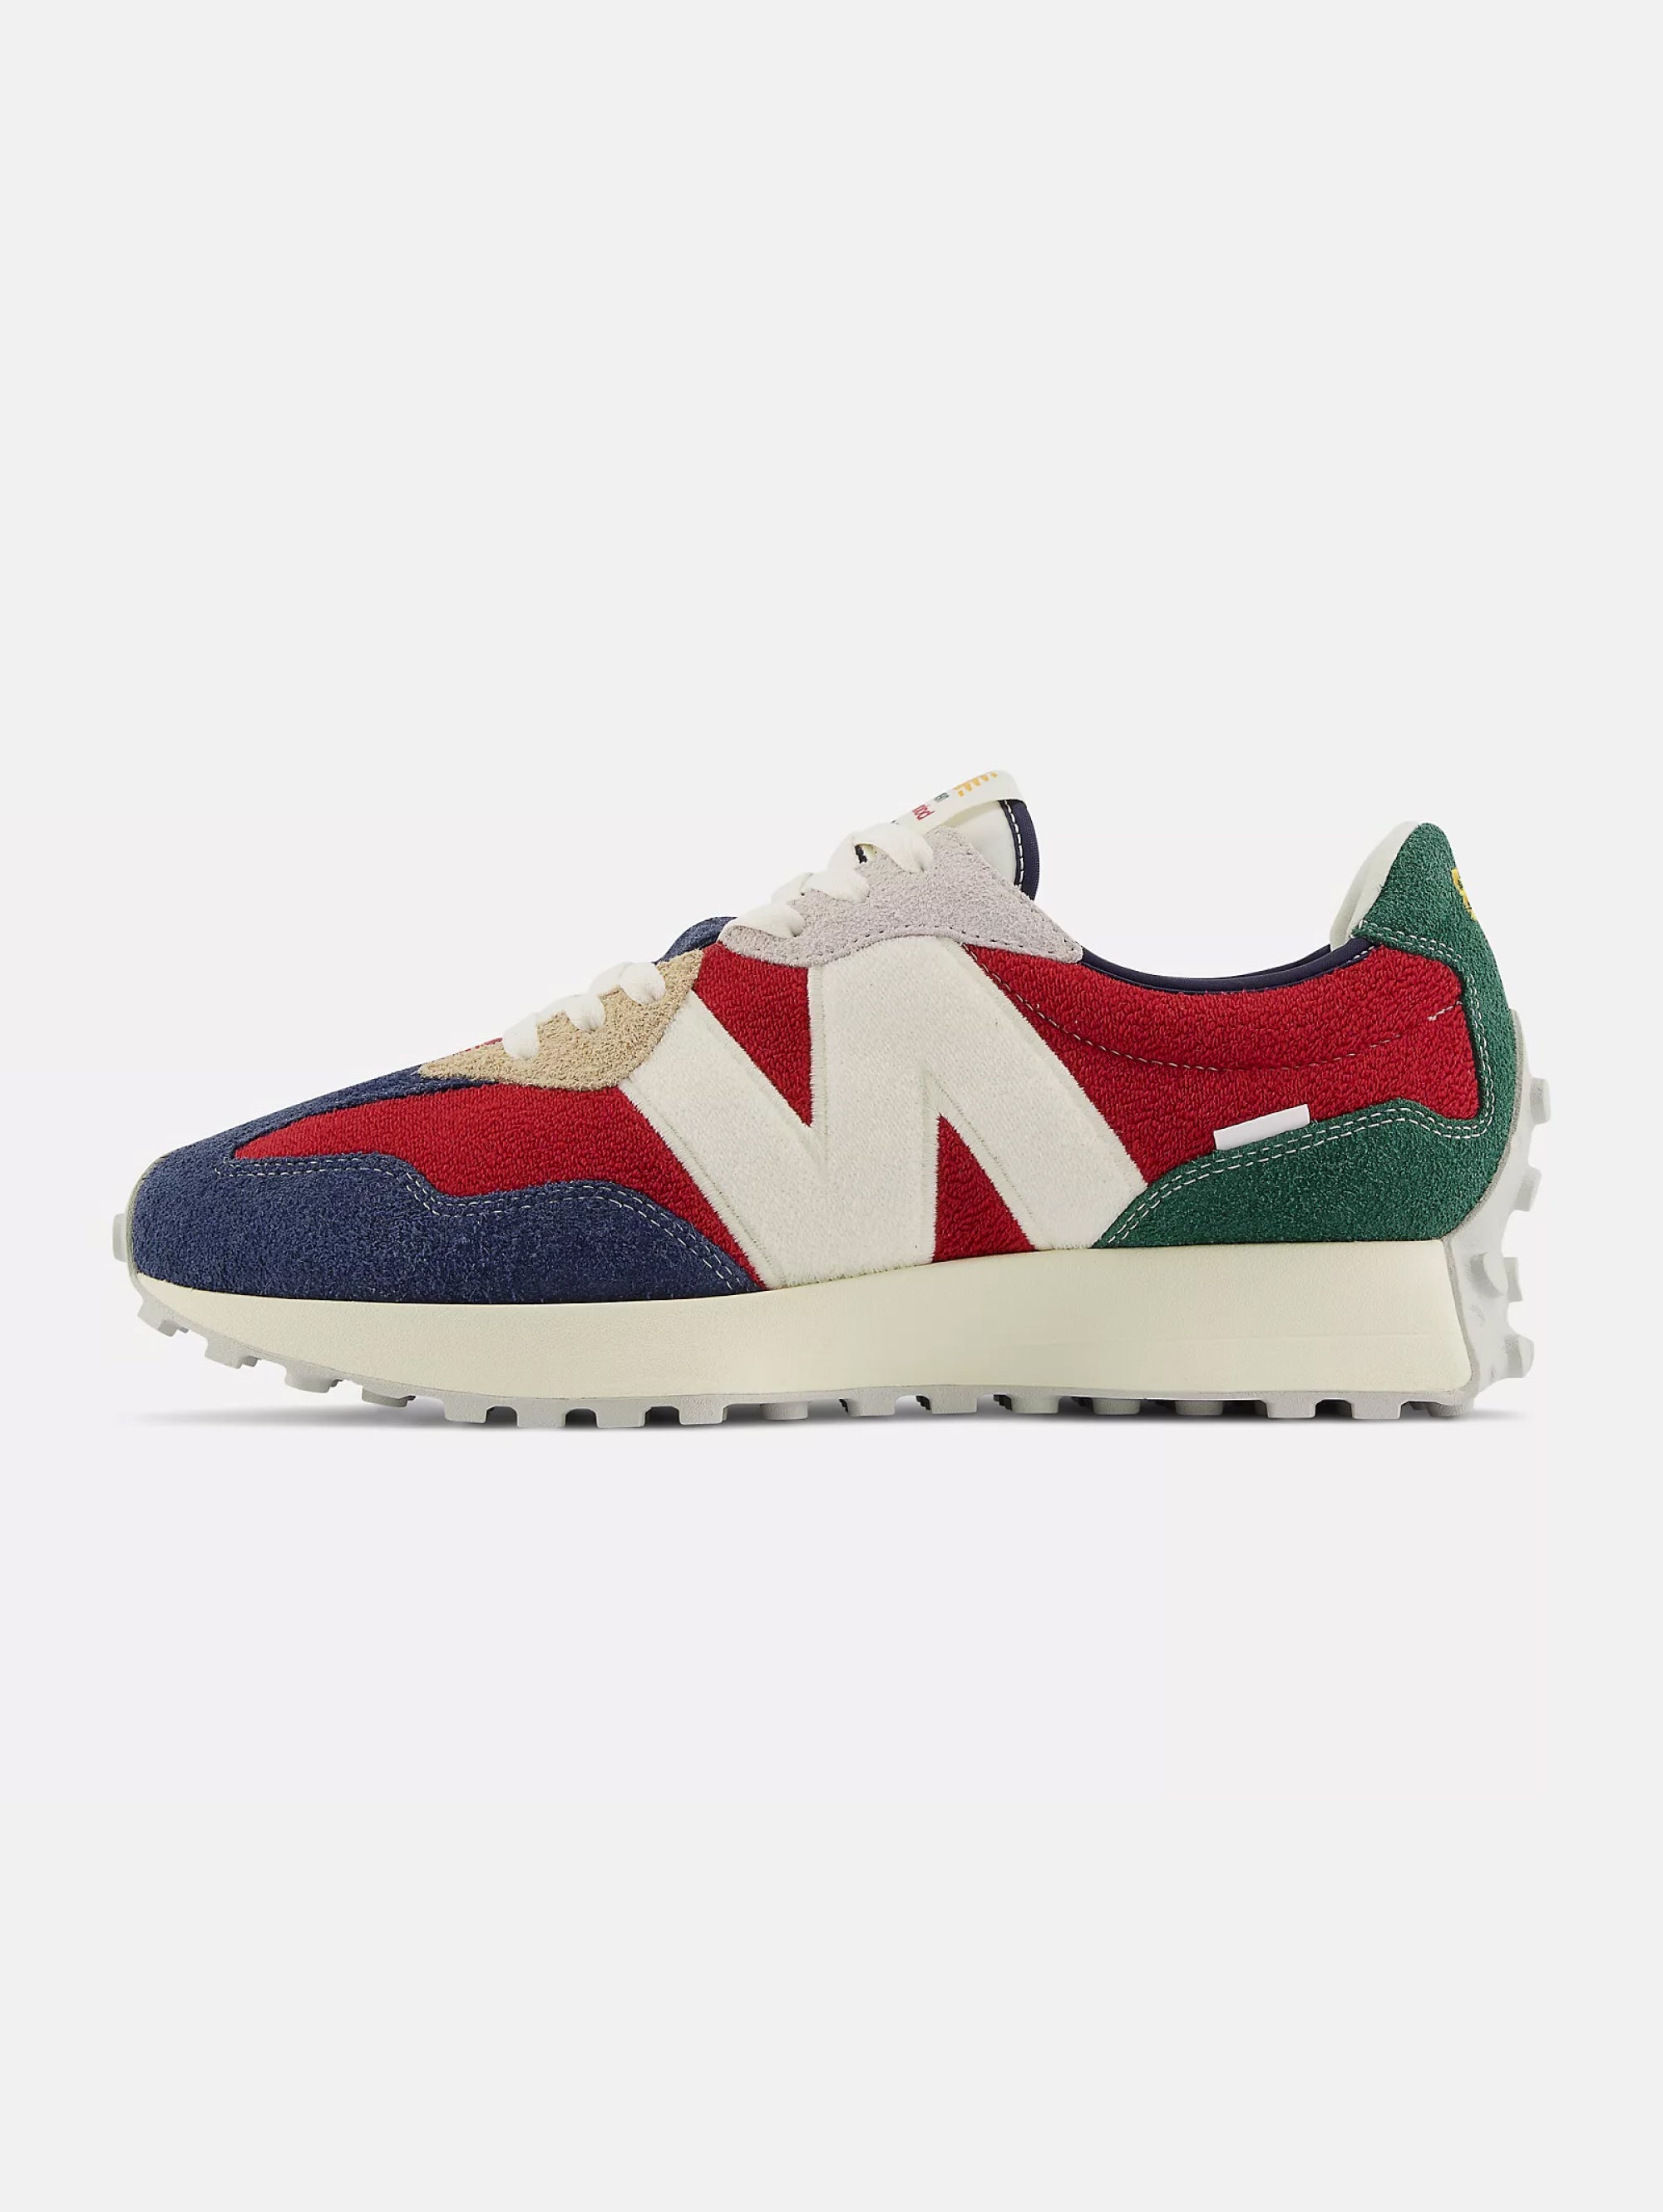 NEW BALANCE-Sneakers in Pelle 327 Rosso/Blu/Verde-TRYME Shop